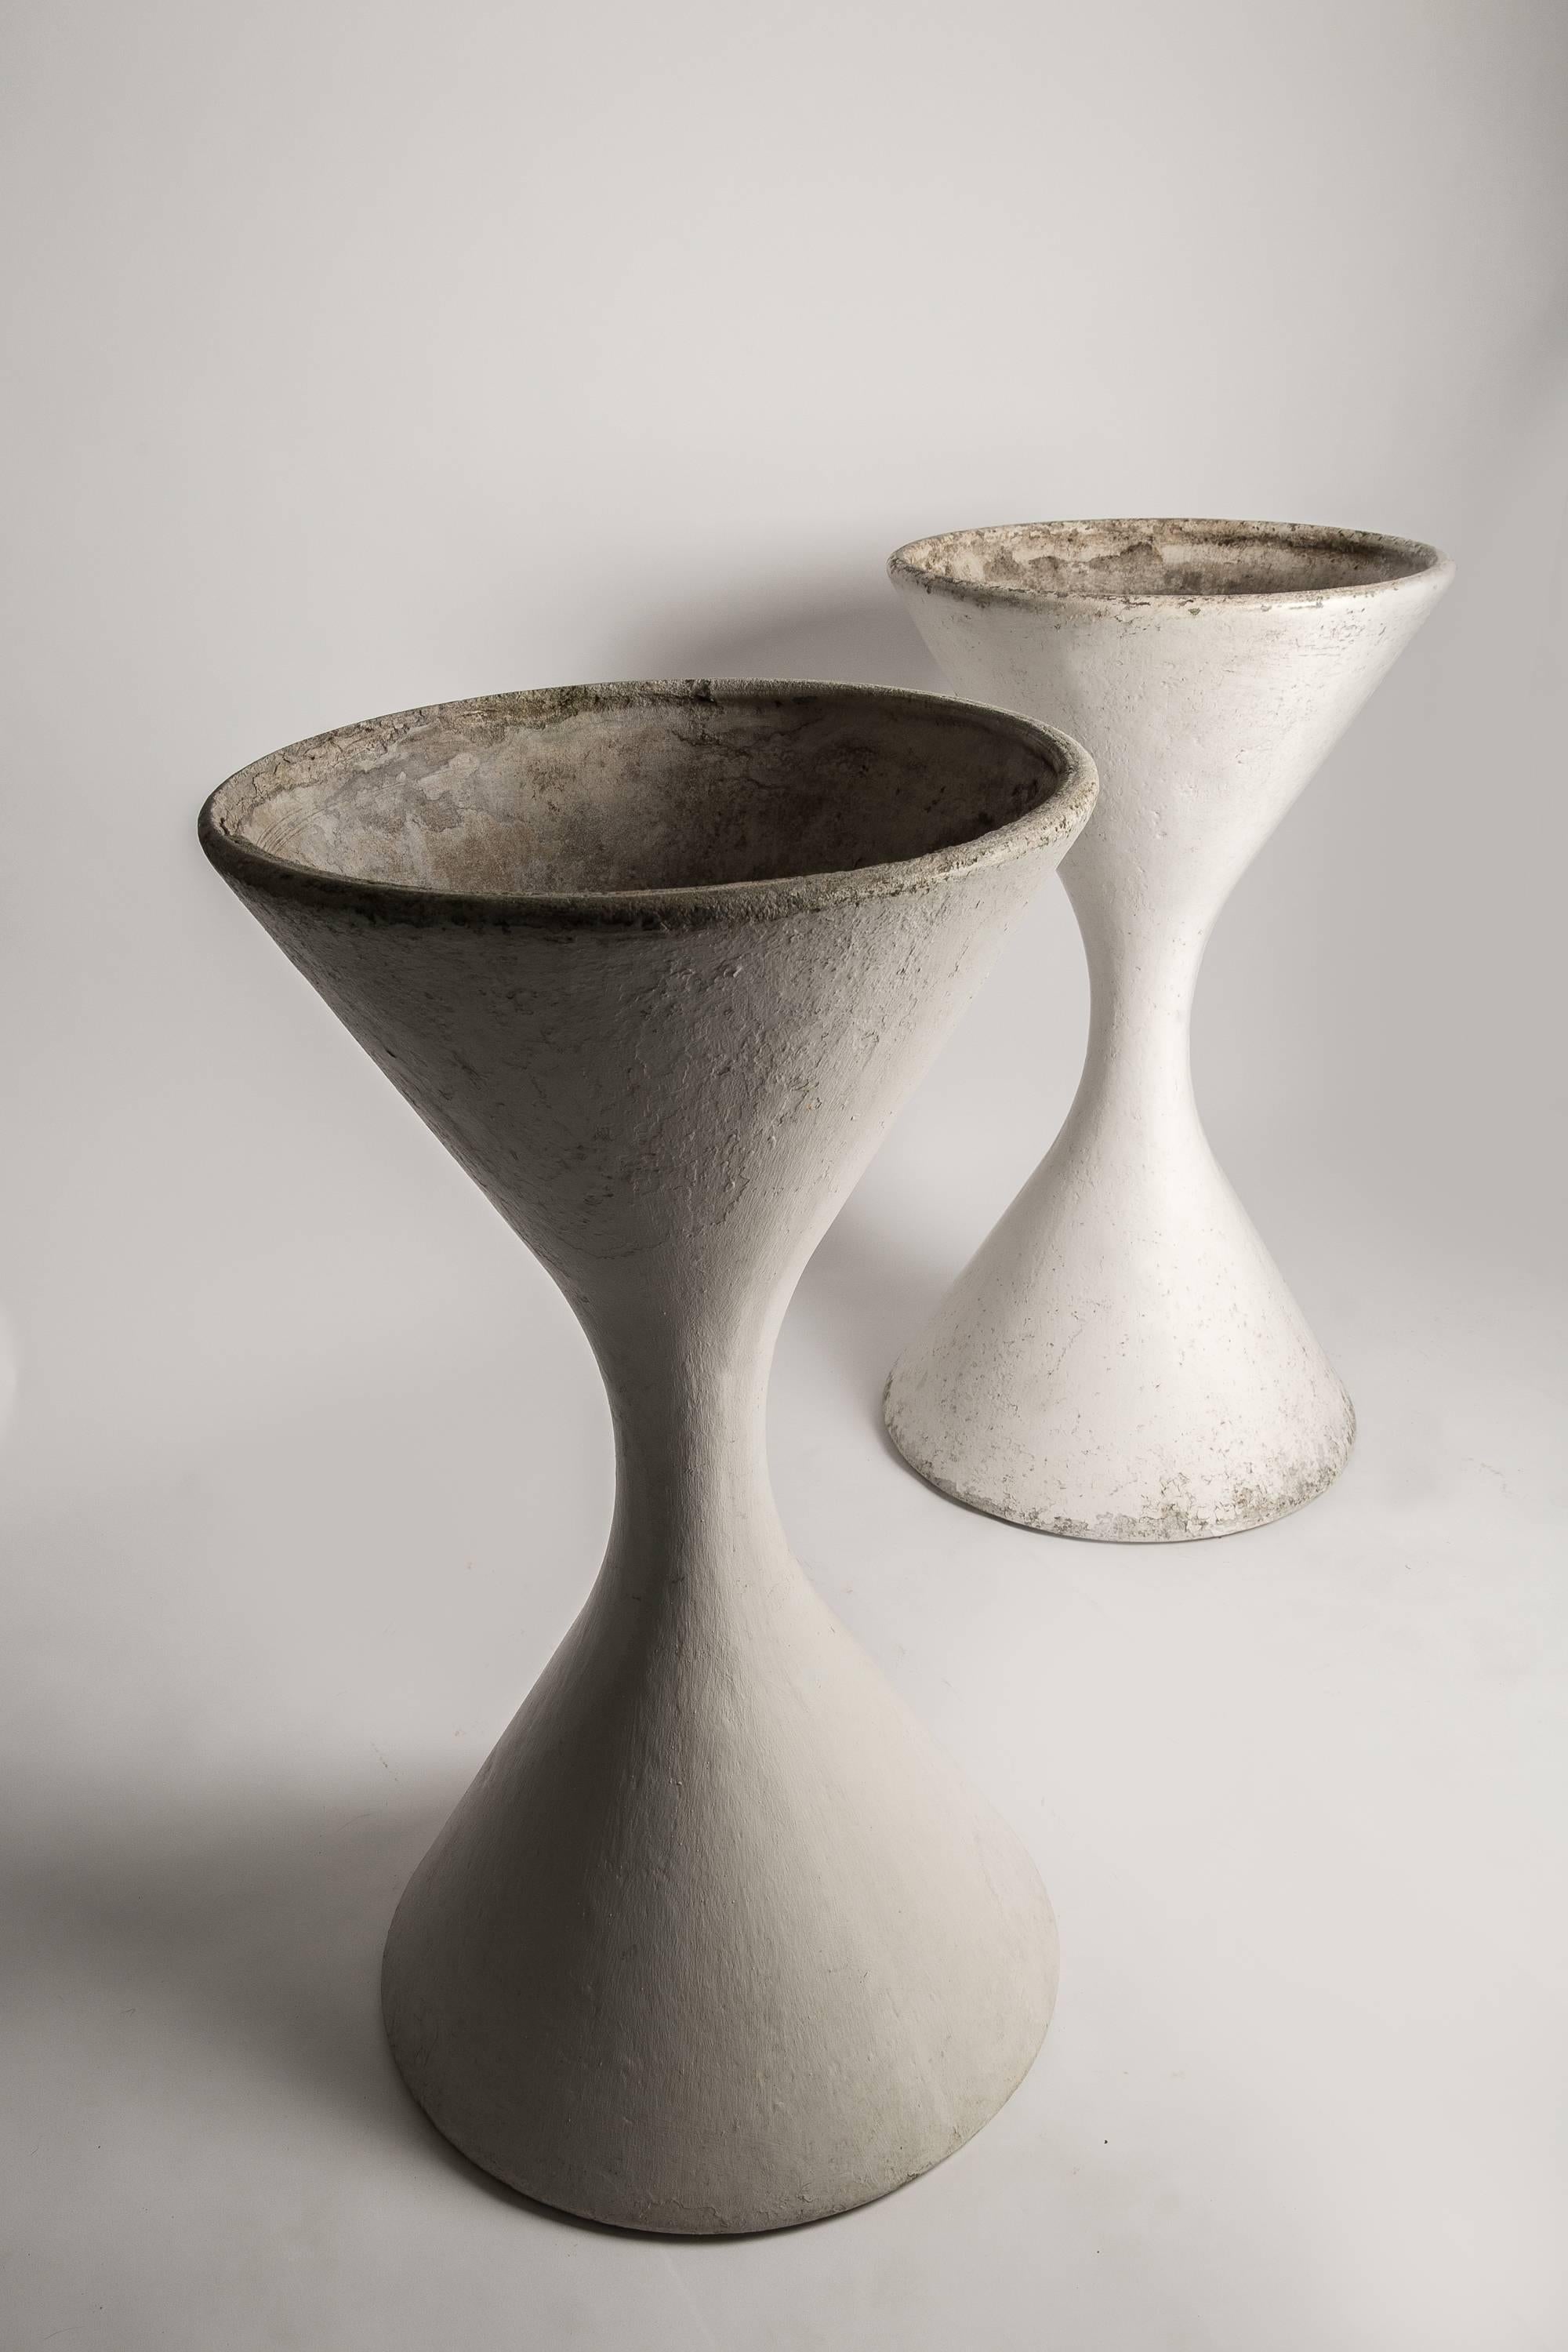 Pair of generously proportioned white sculptural planters, designed by Willy Guhl for Eternit AG, Switzerland. Signed with original Eternit label. They retain their wonderful original patina.